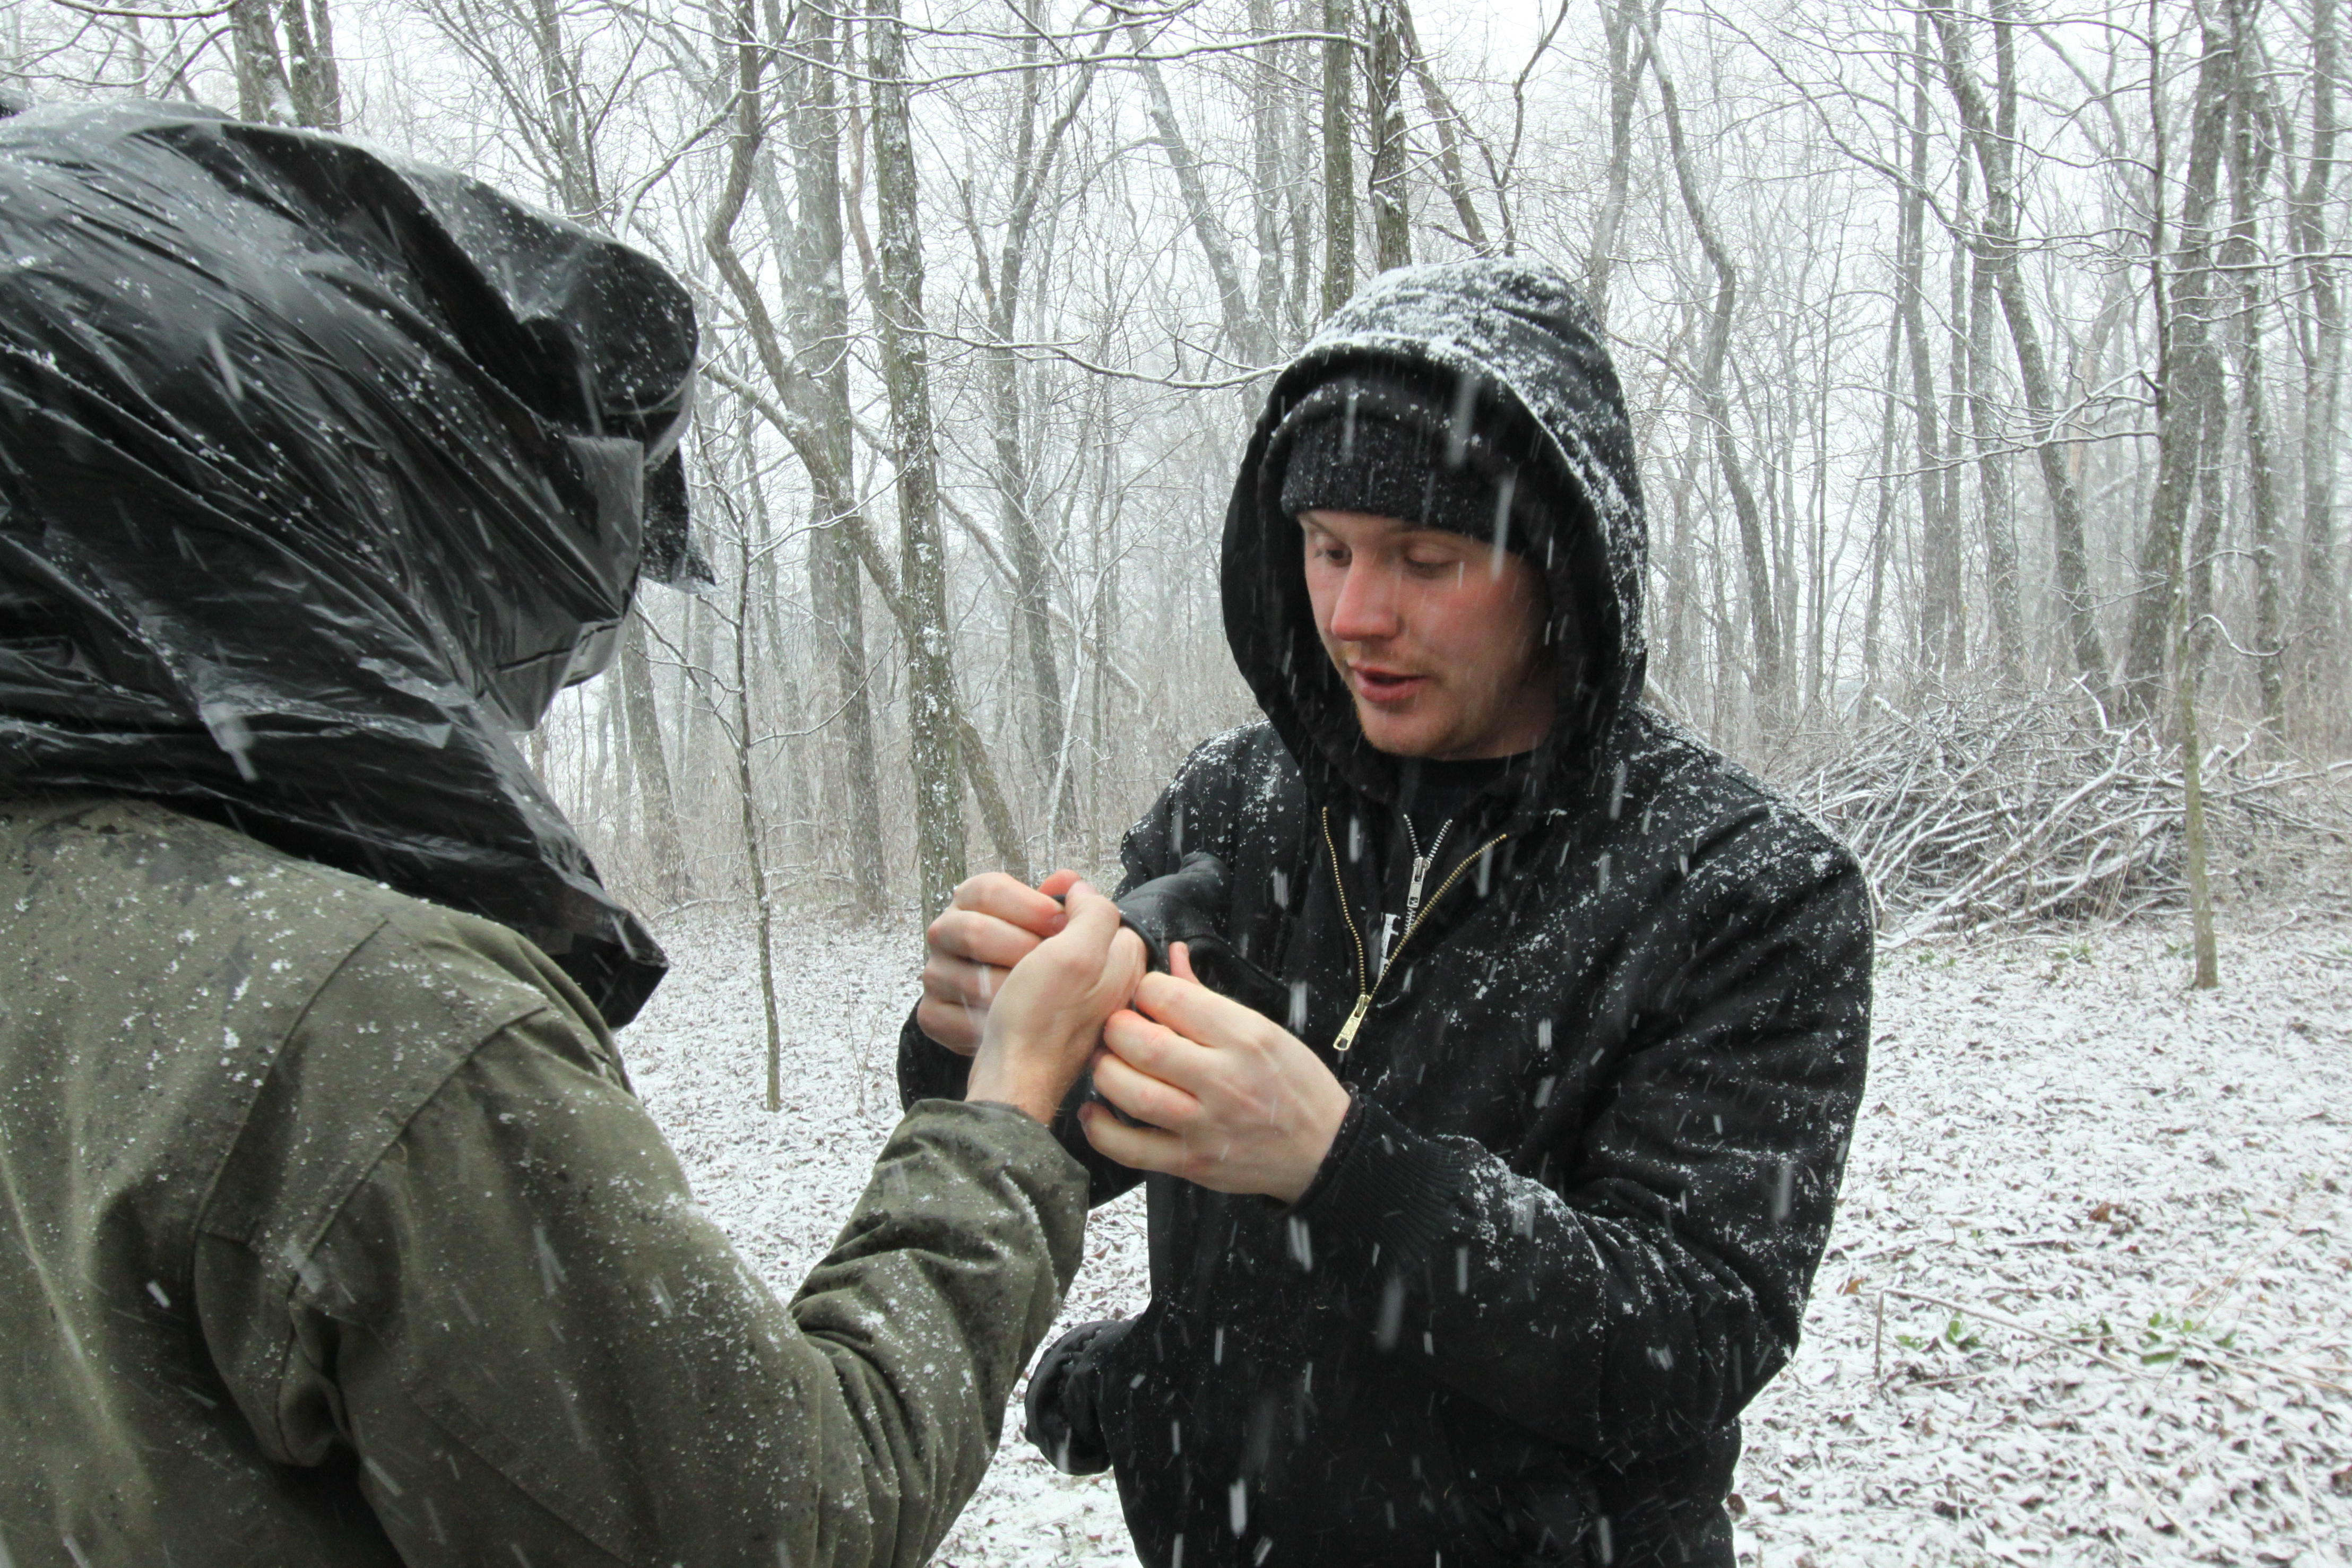 Assisting director of photography, Travis Auclair, put his glove on while filming during a blizzard.